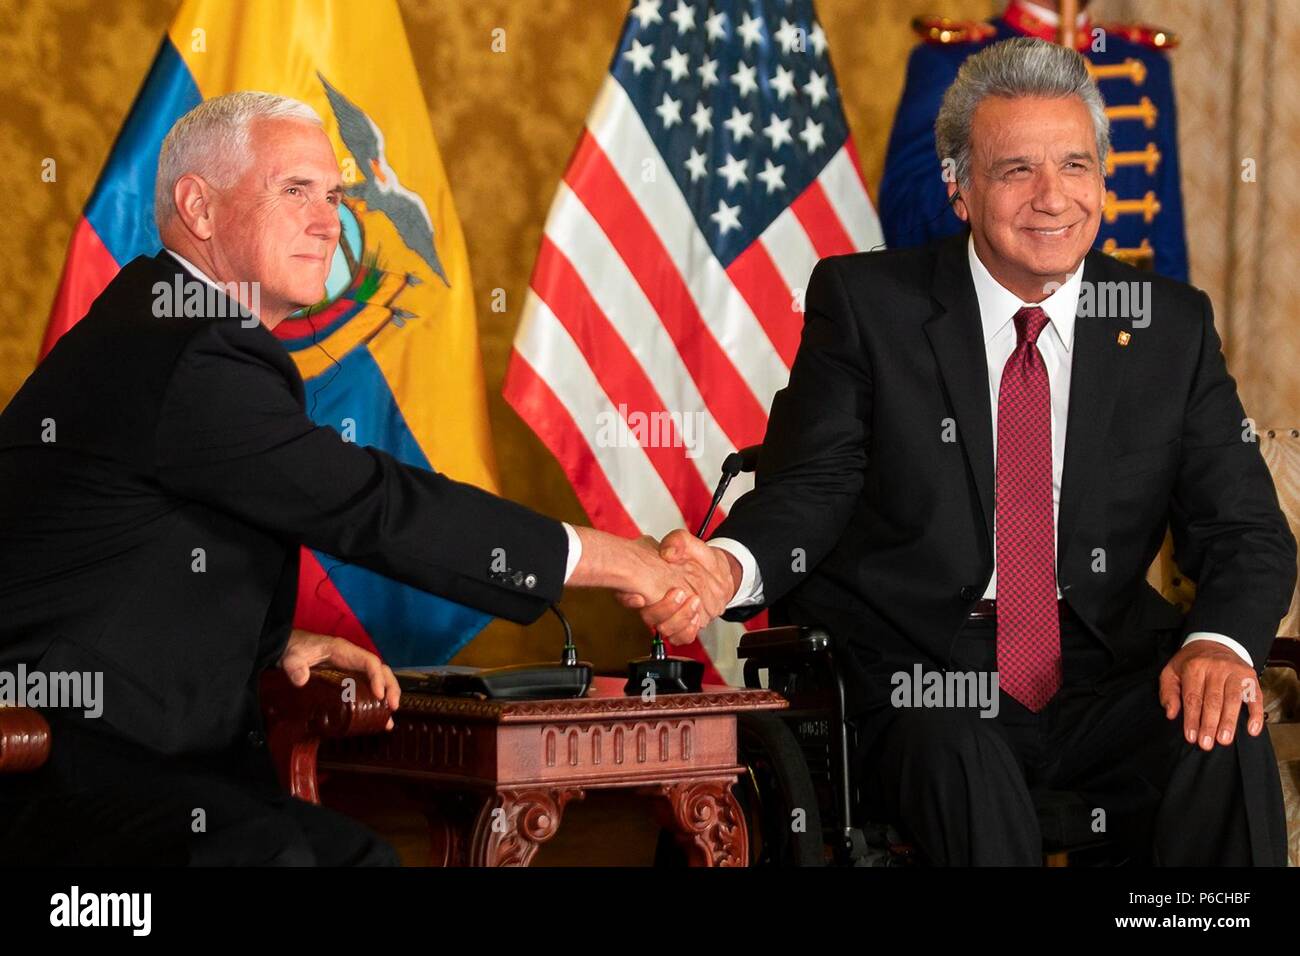 U.S. Vice President Mike Pence, left, shakes hands with Ecuador President Lenin Moreno prior to their bilateral meeting at the government palace June 28, 2018 in Quito, Ecuador. Stock Photo